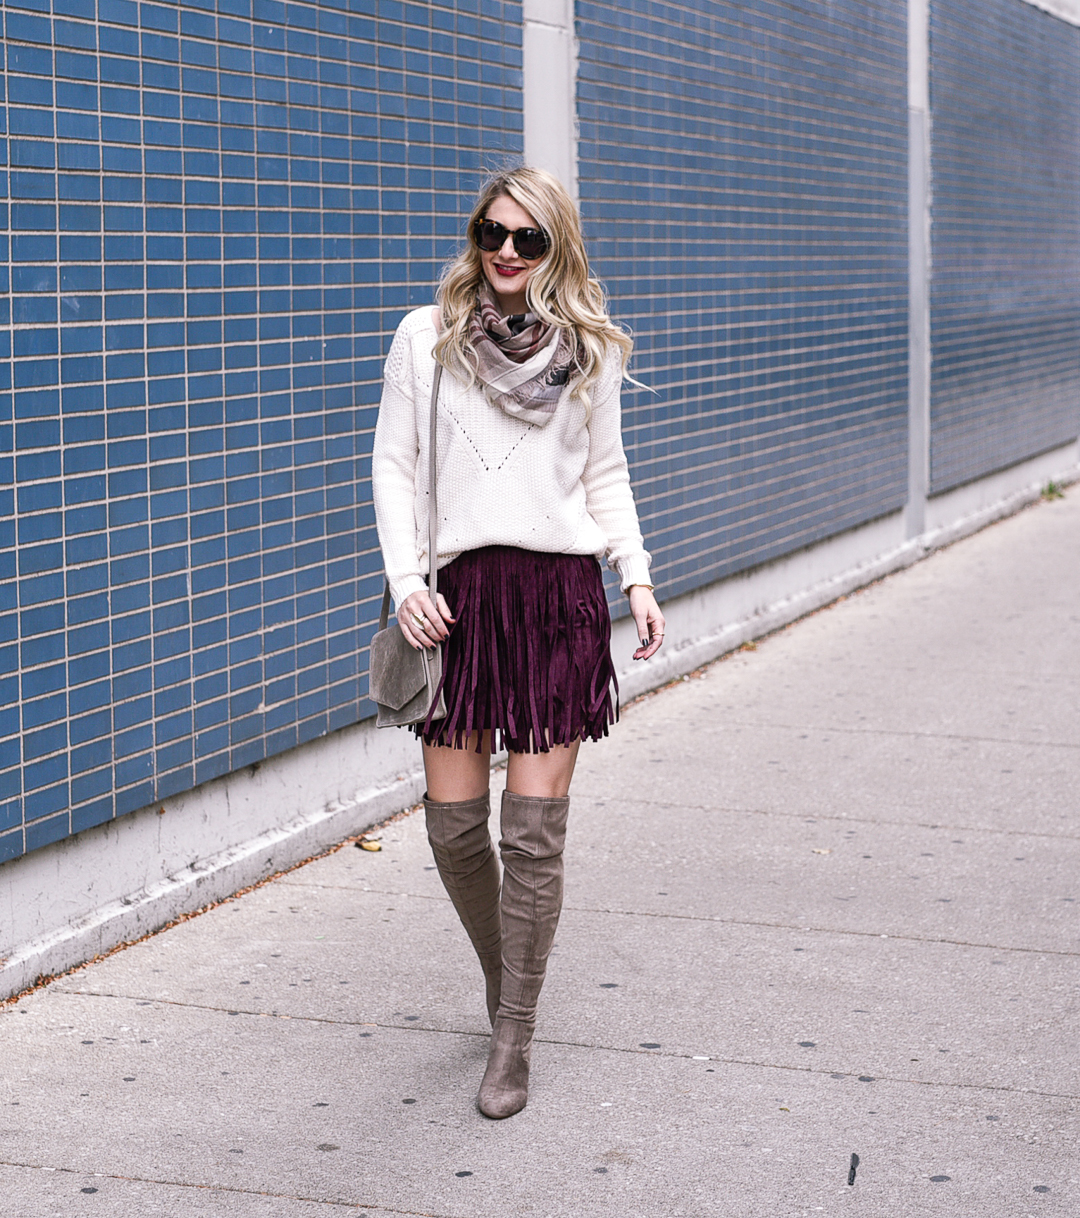 Visions of Vogue wearing a fall look: cozy knits and fringe. 